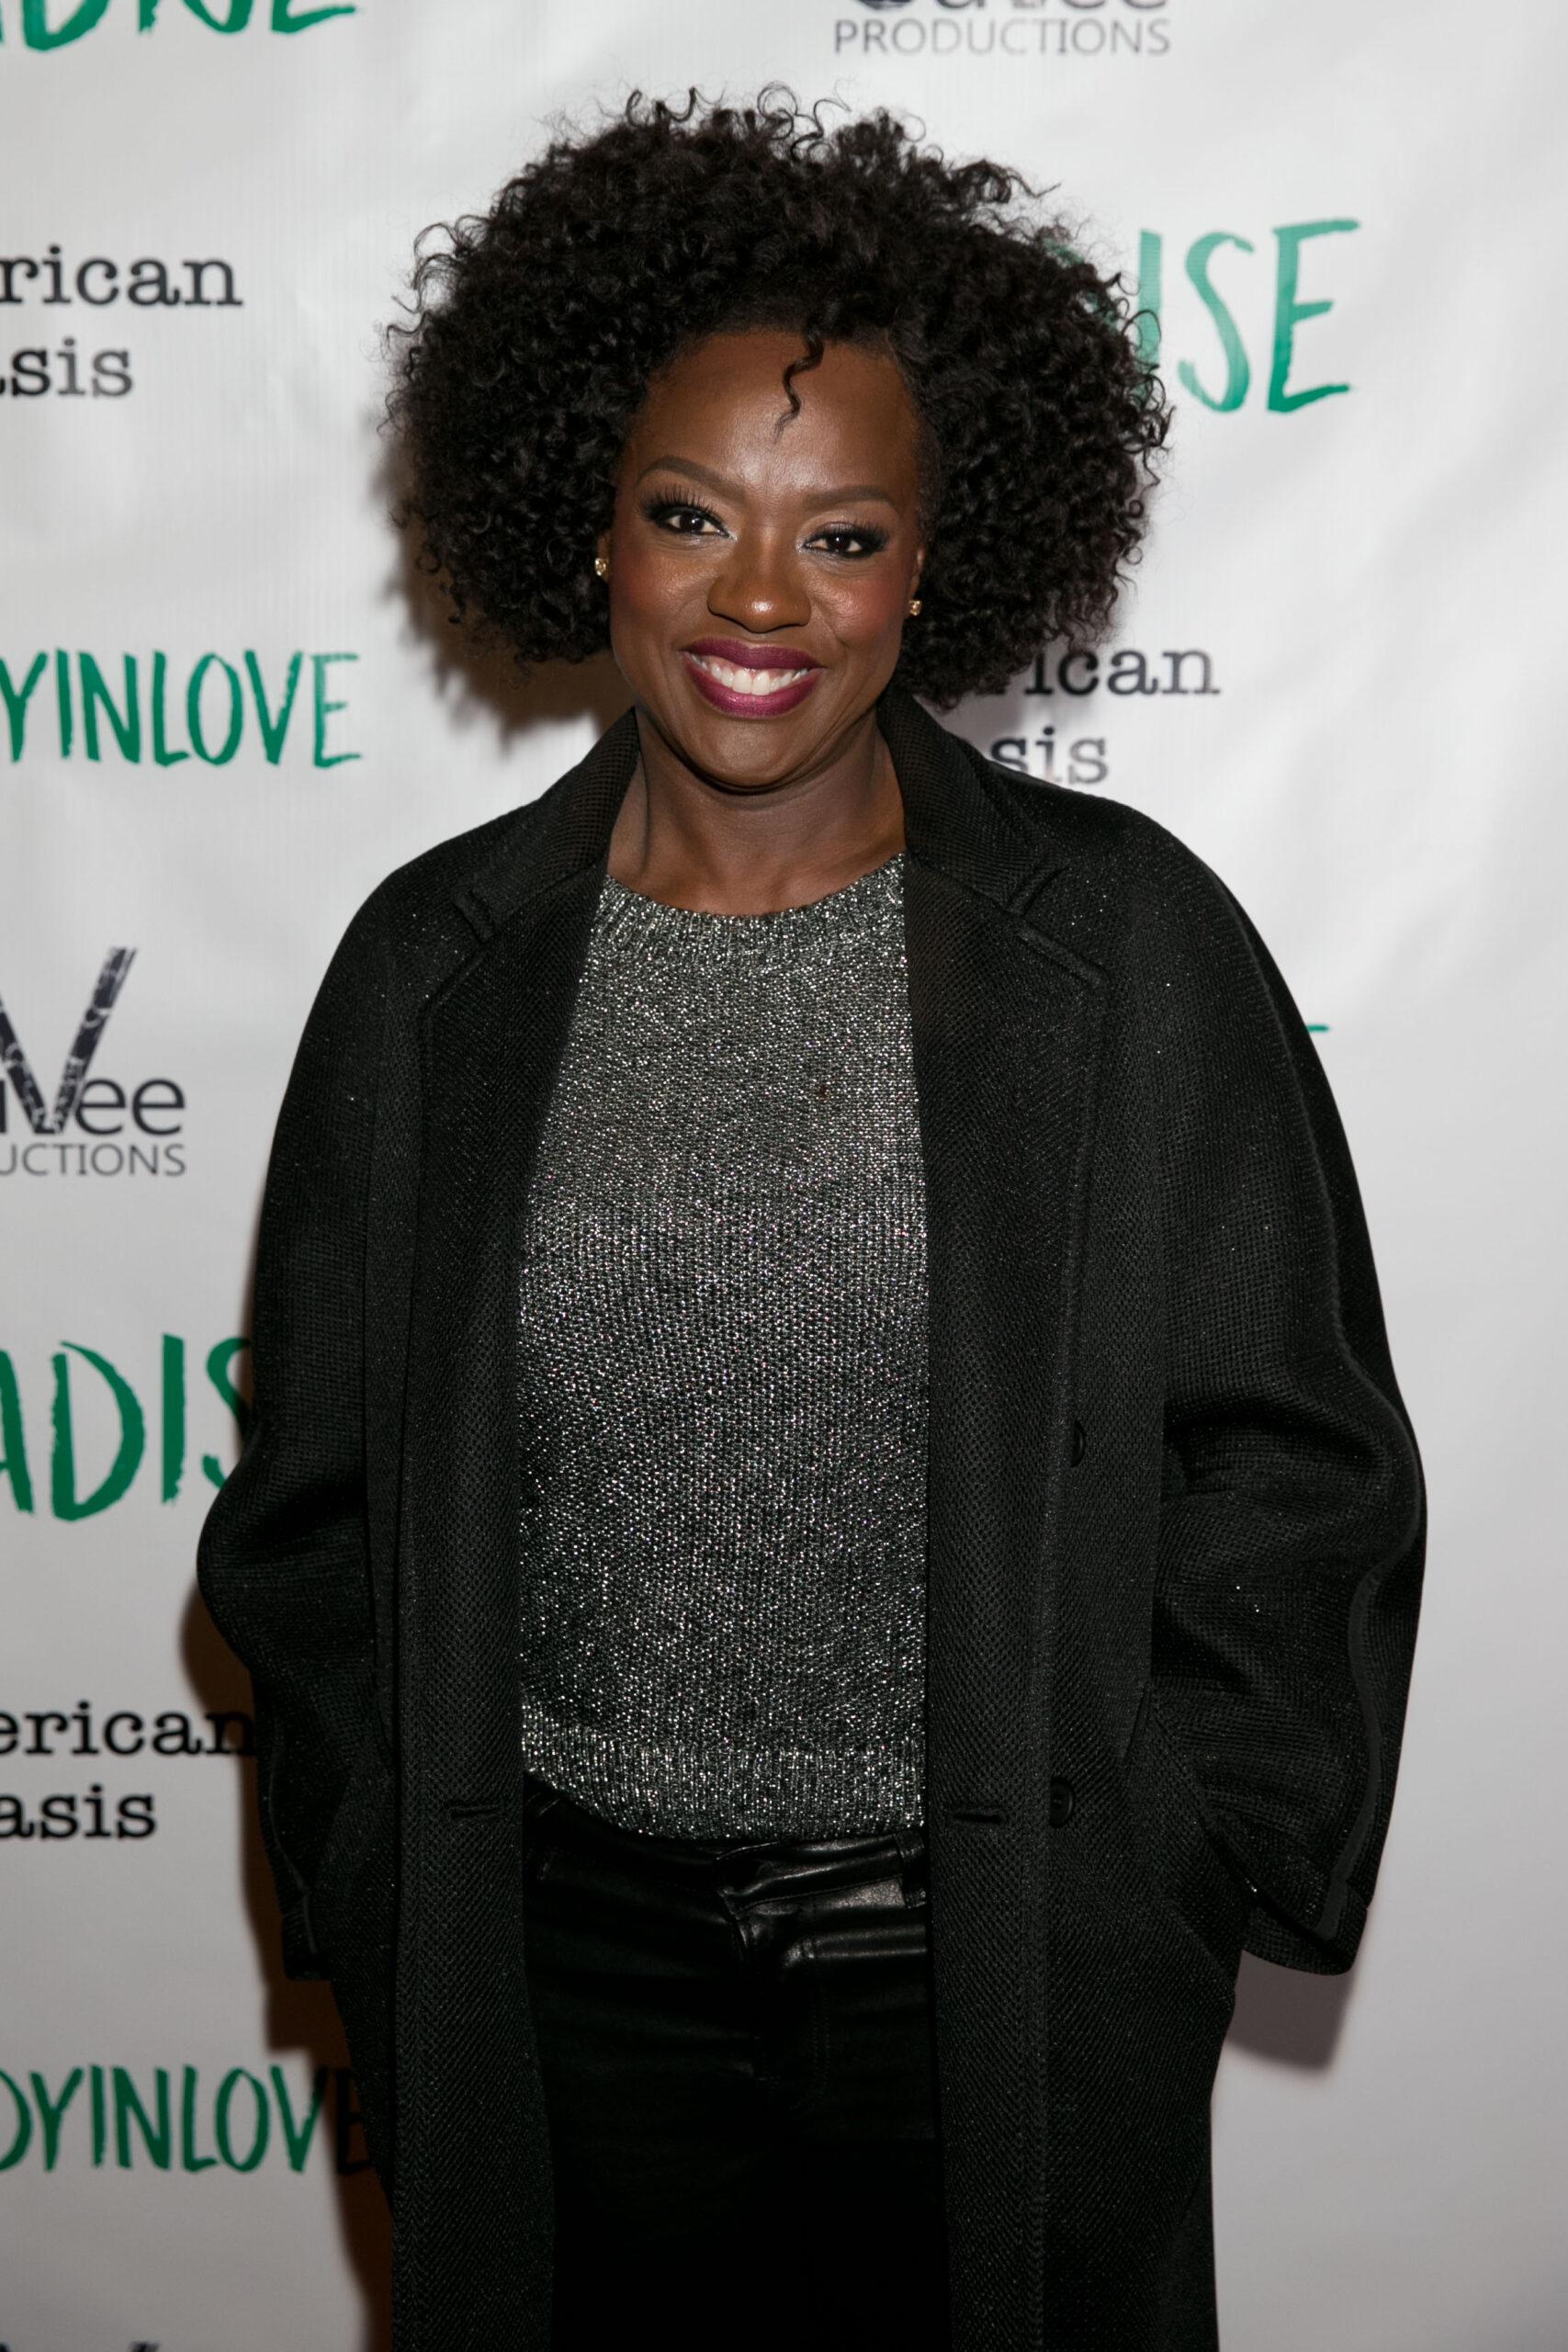 Viola Davis and Husband Julius Tennon attend the West Coast Premiere of their produced play Pardise